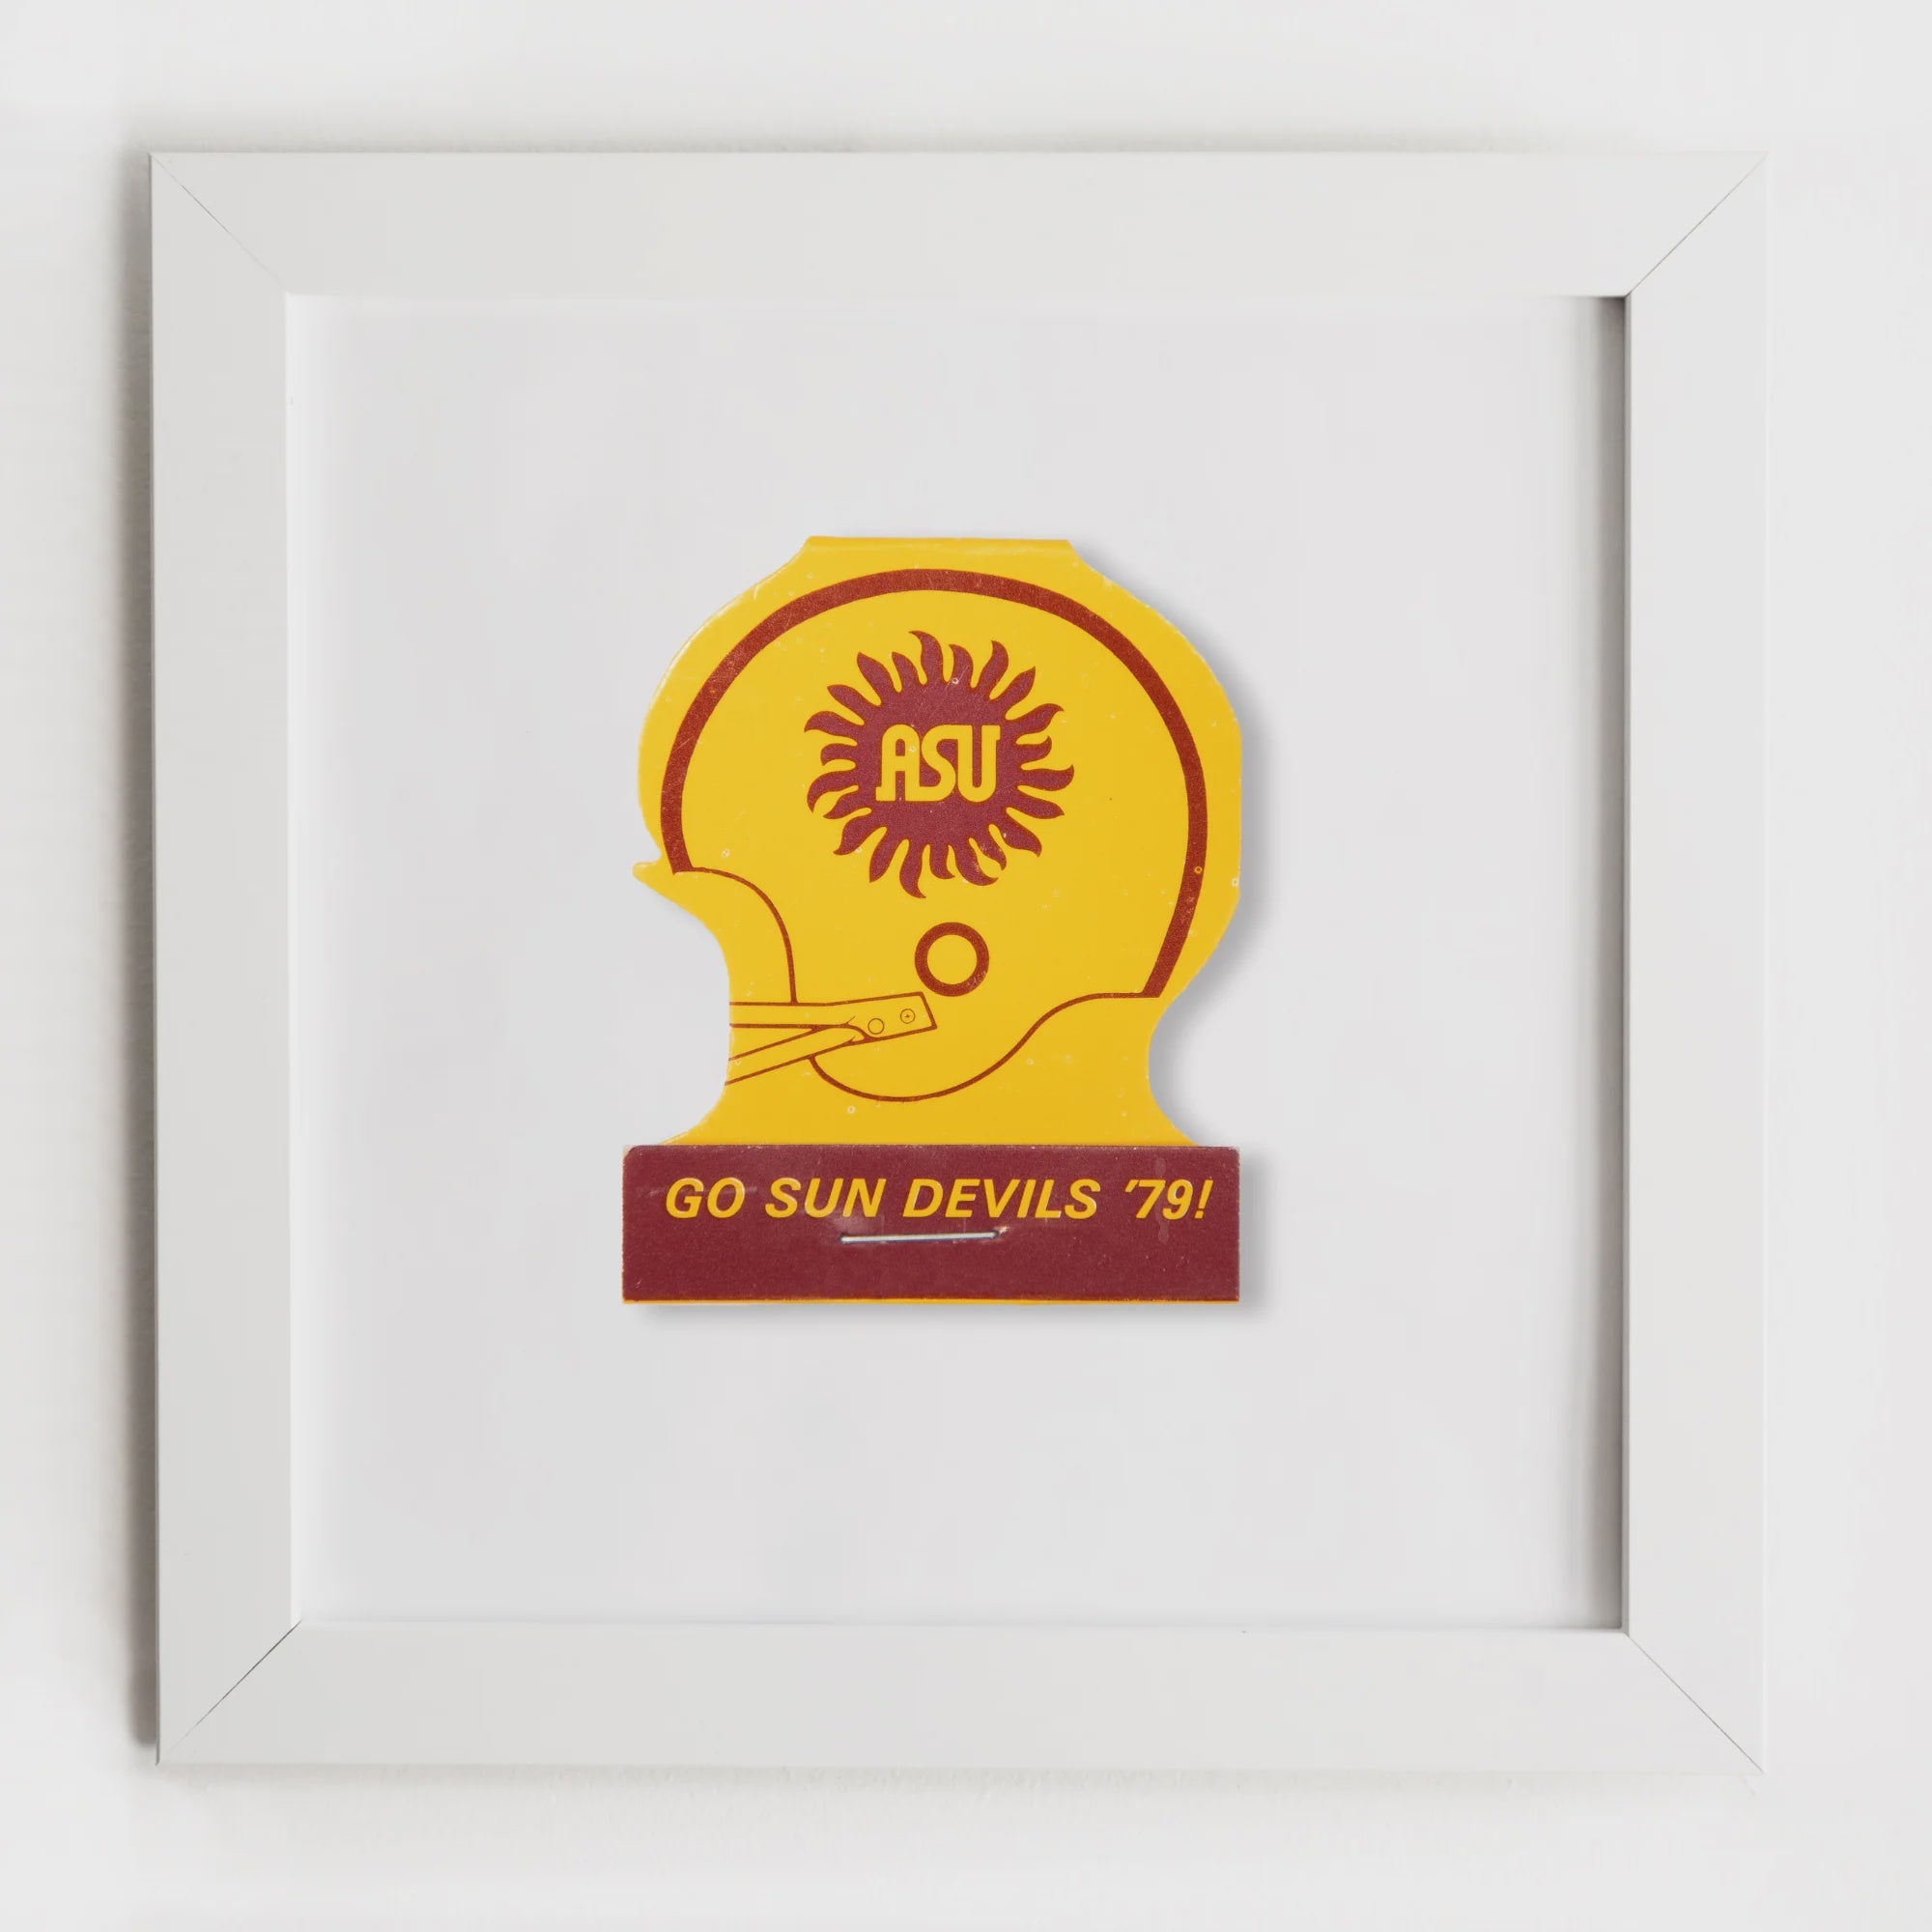 A Match South Art Square White Frame featuring a framed vintage Arizona State University sticker with a yellow and maroon design, the text &quot;Go Sun Devils &#39;79!&quot;, and a stylized sun motif in Bungalow style.